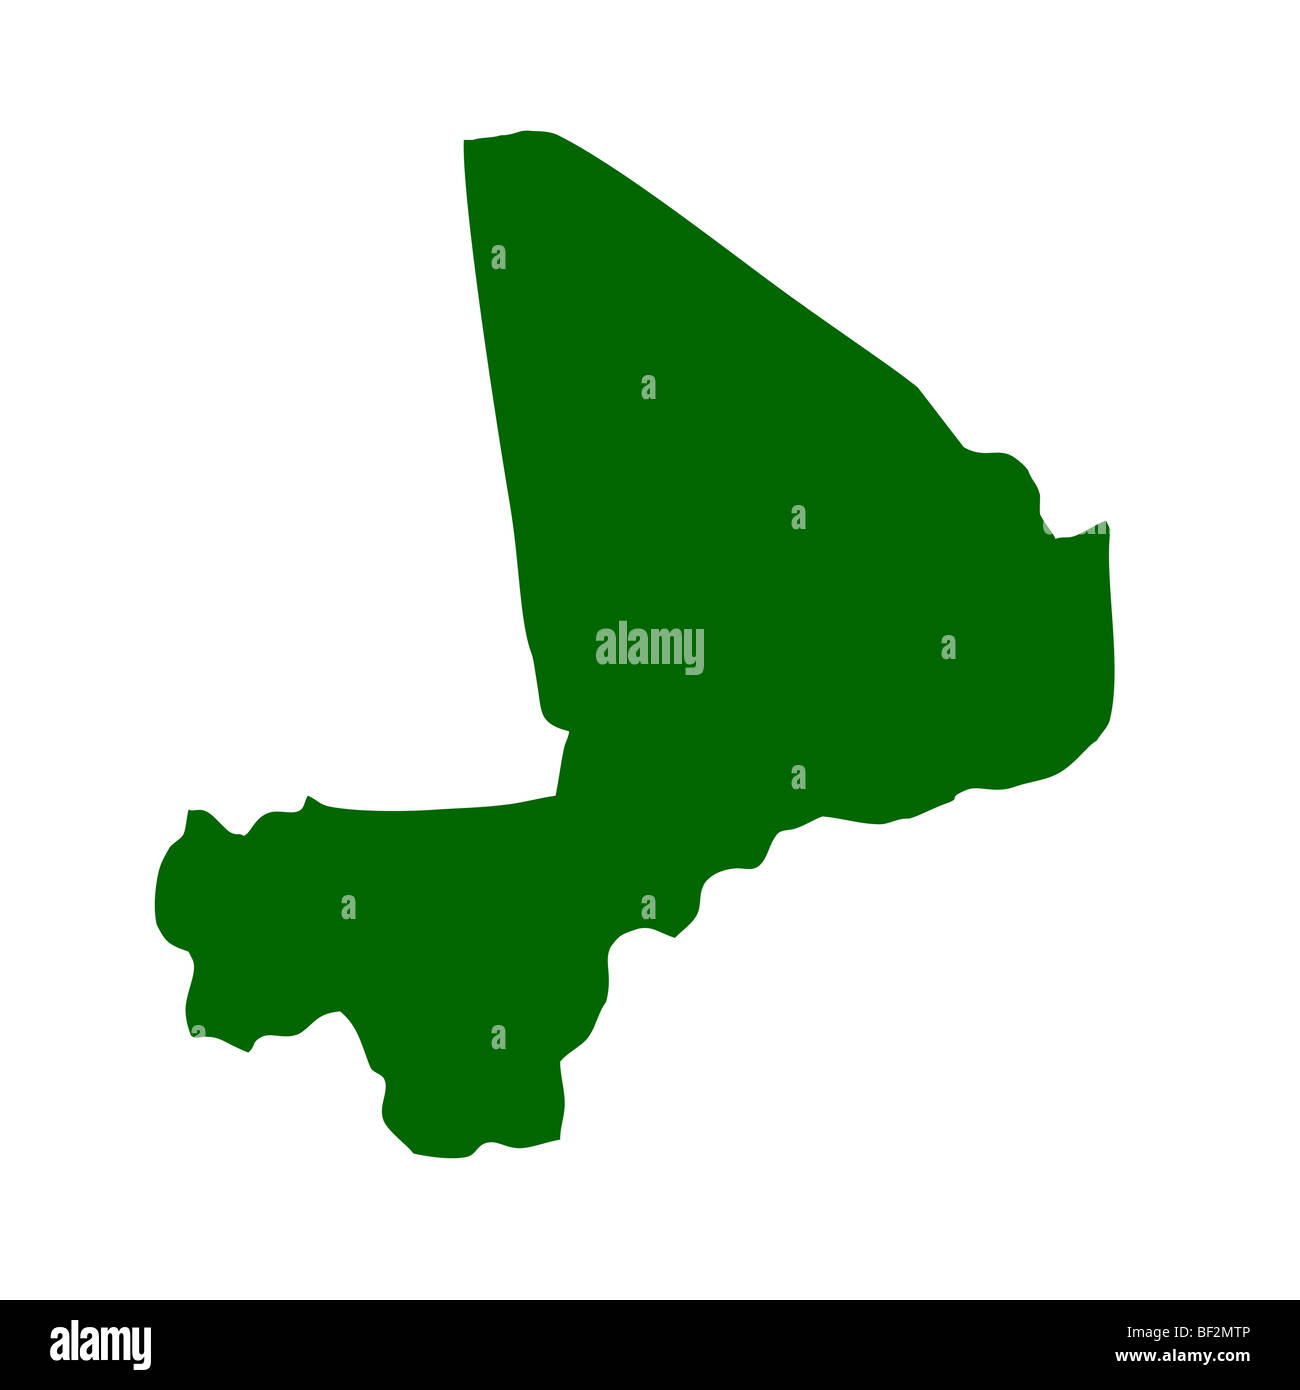 Outline map of Mali isolated on white background with clipping path. Stock Photo